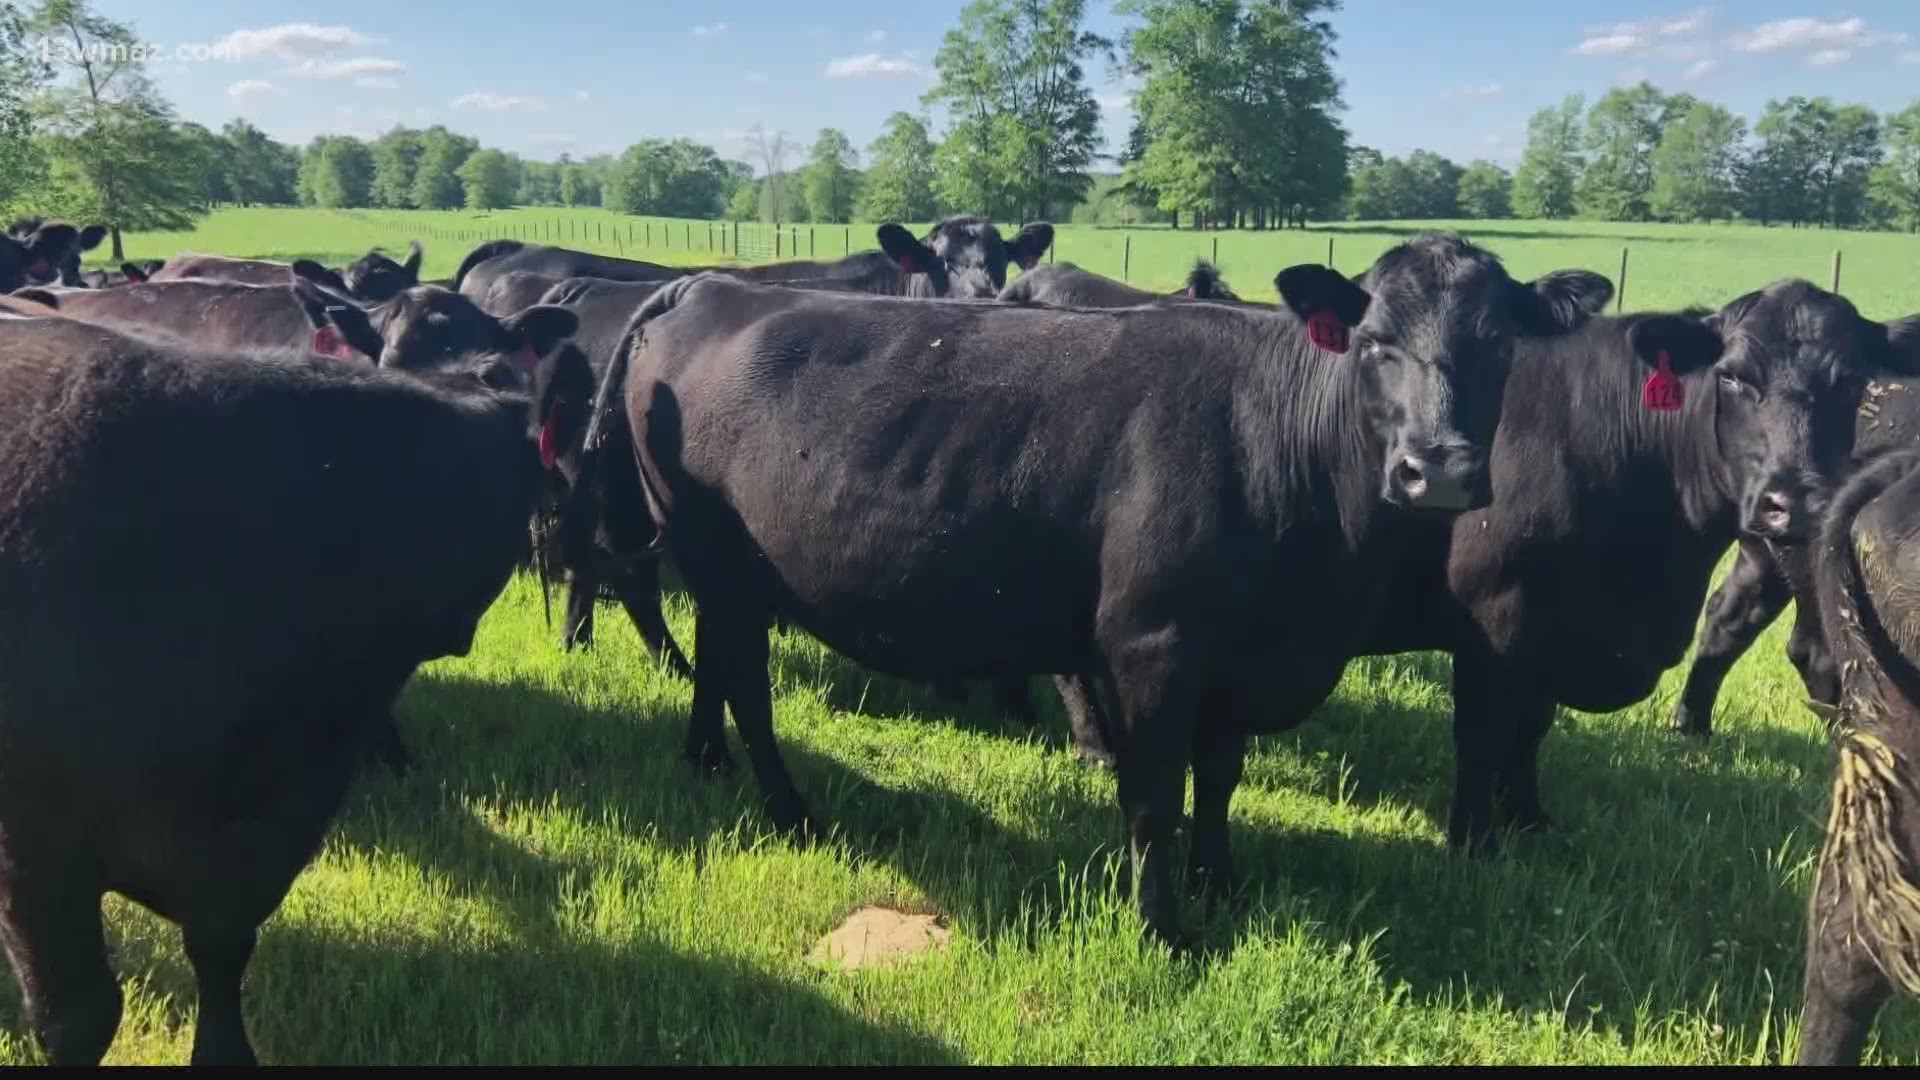 The Georgia Farm Bureau just came out with a report saying many farmers will lose $50,000 this year because of COVID-19.